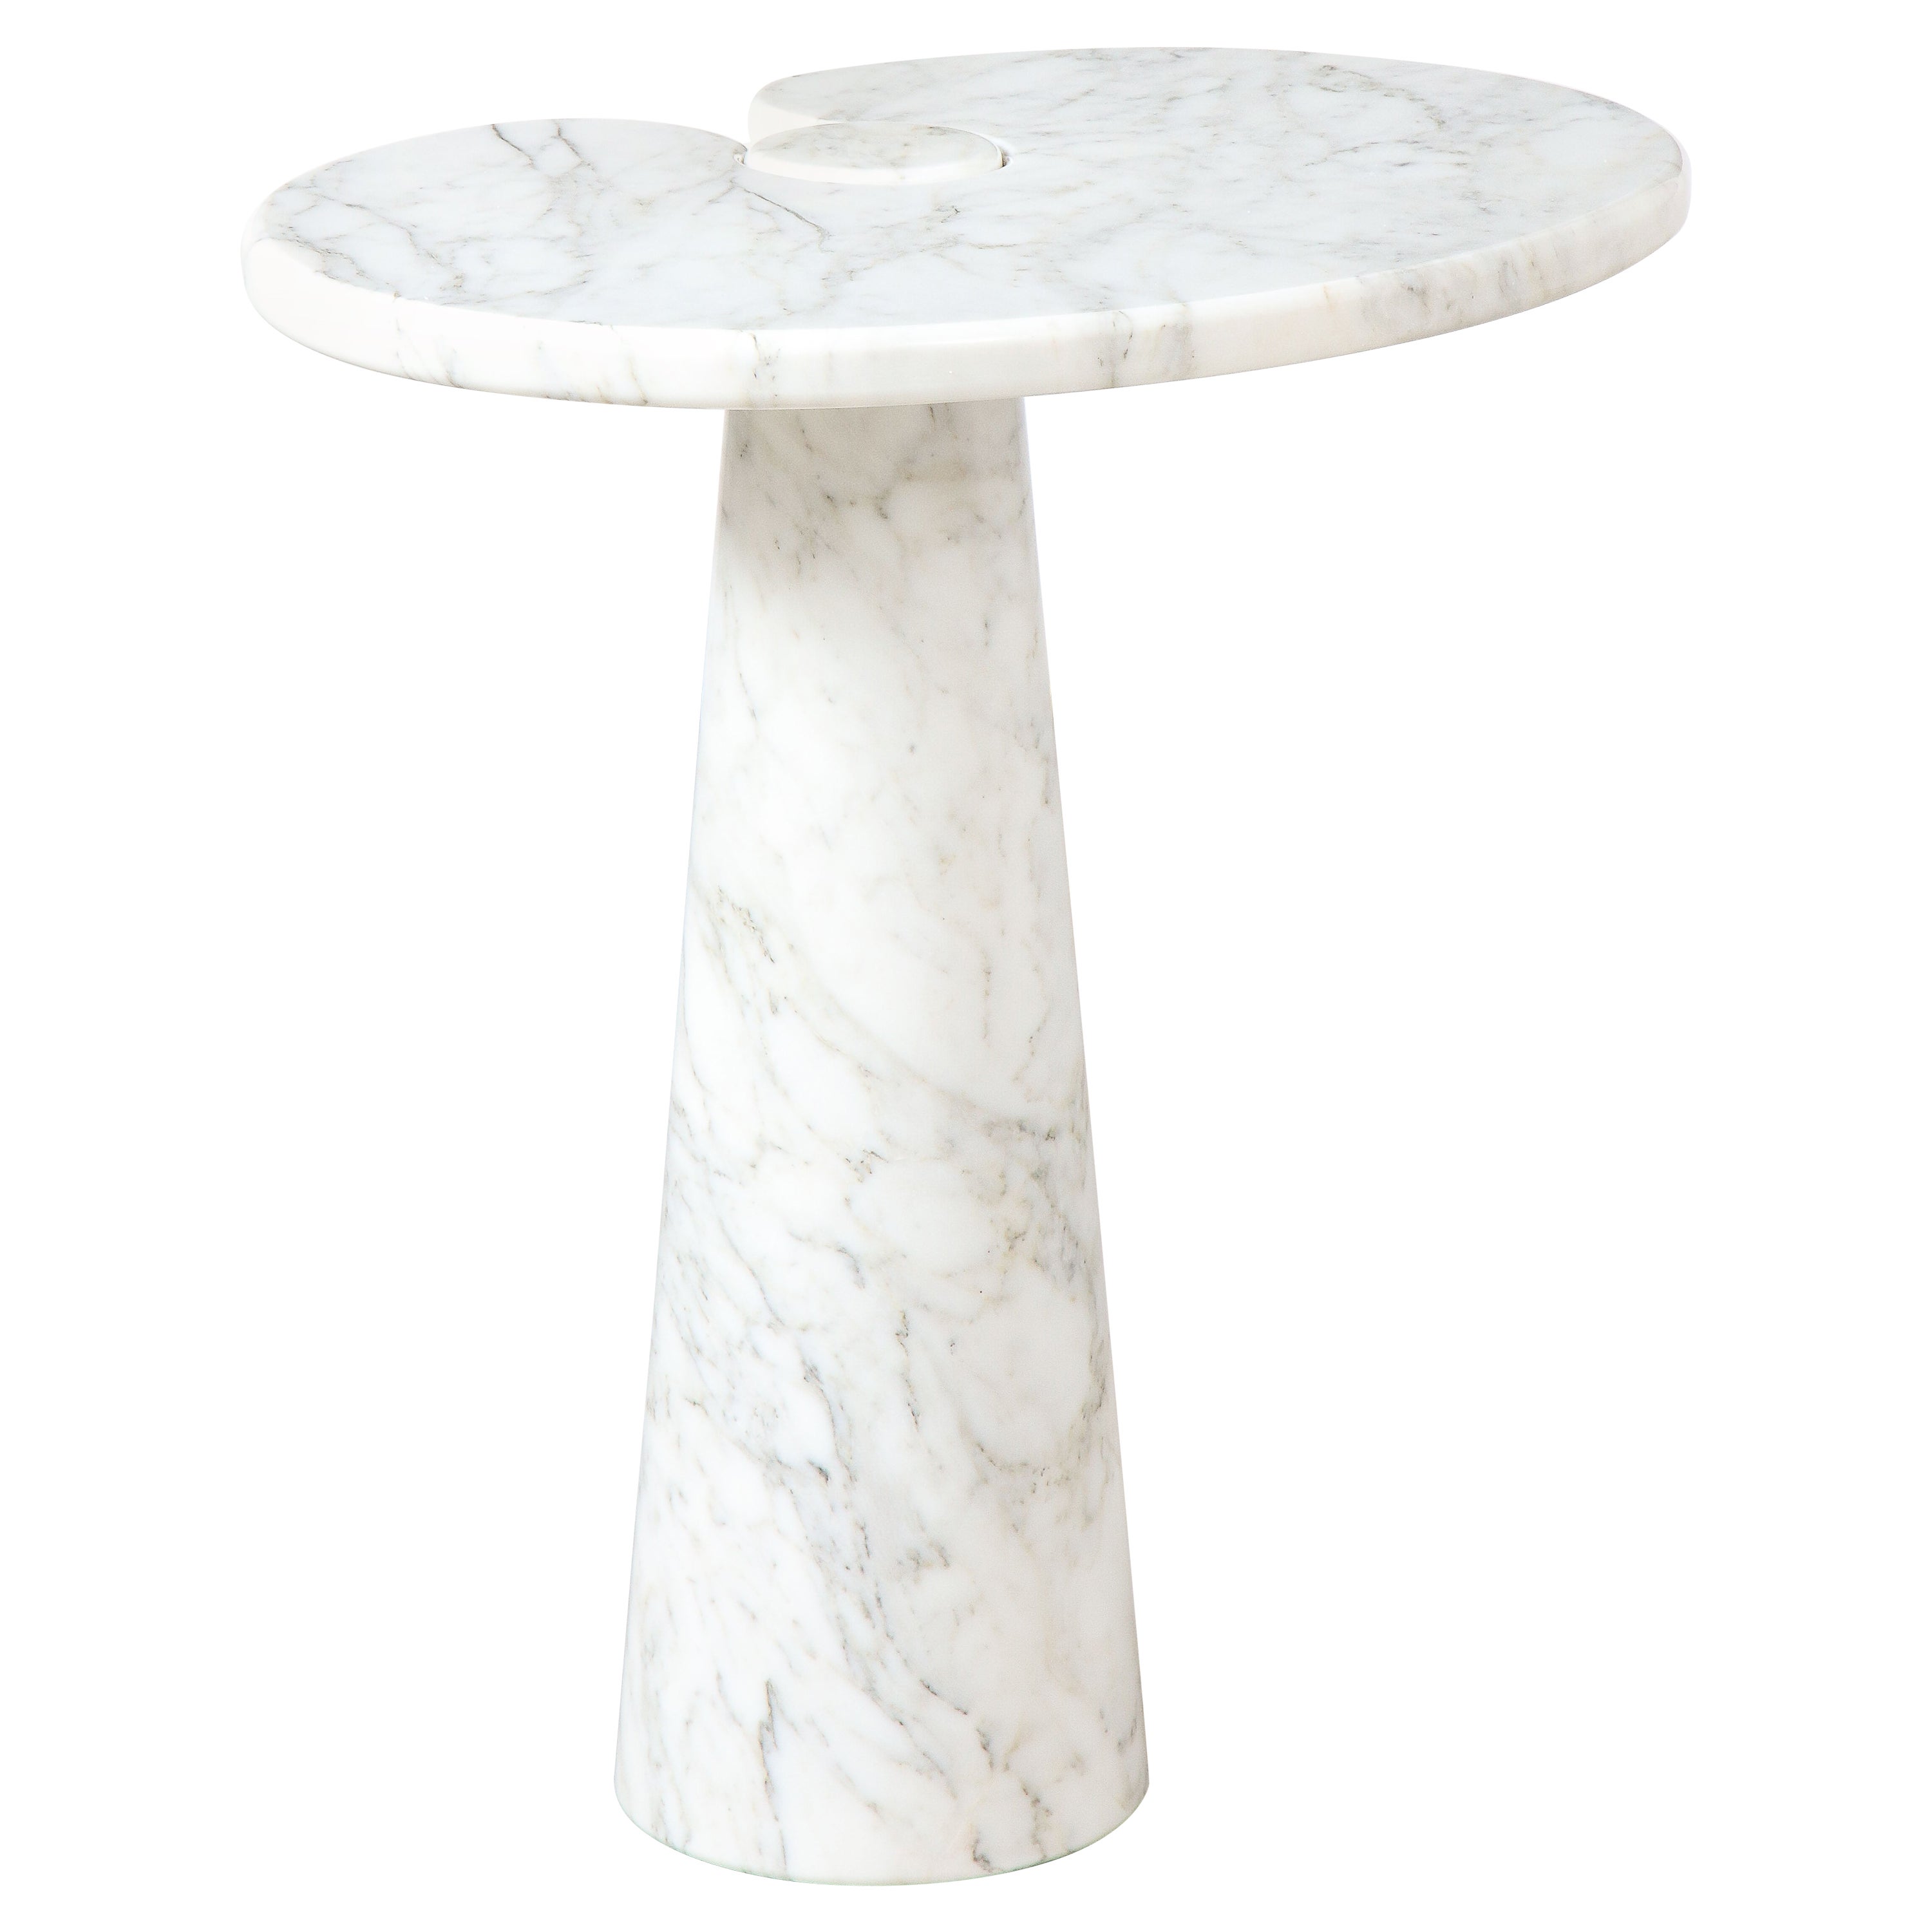 Angelo Mangiarotti for Skipper 'Eros' Series Carrara Marble Tall Side Table For Sale